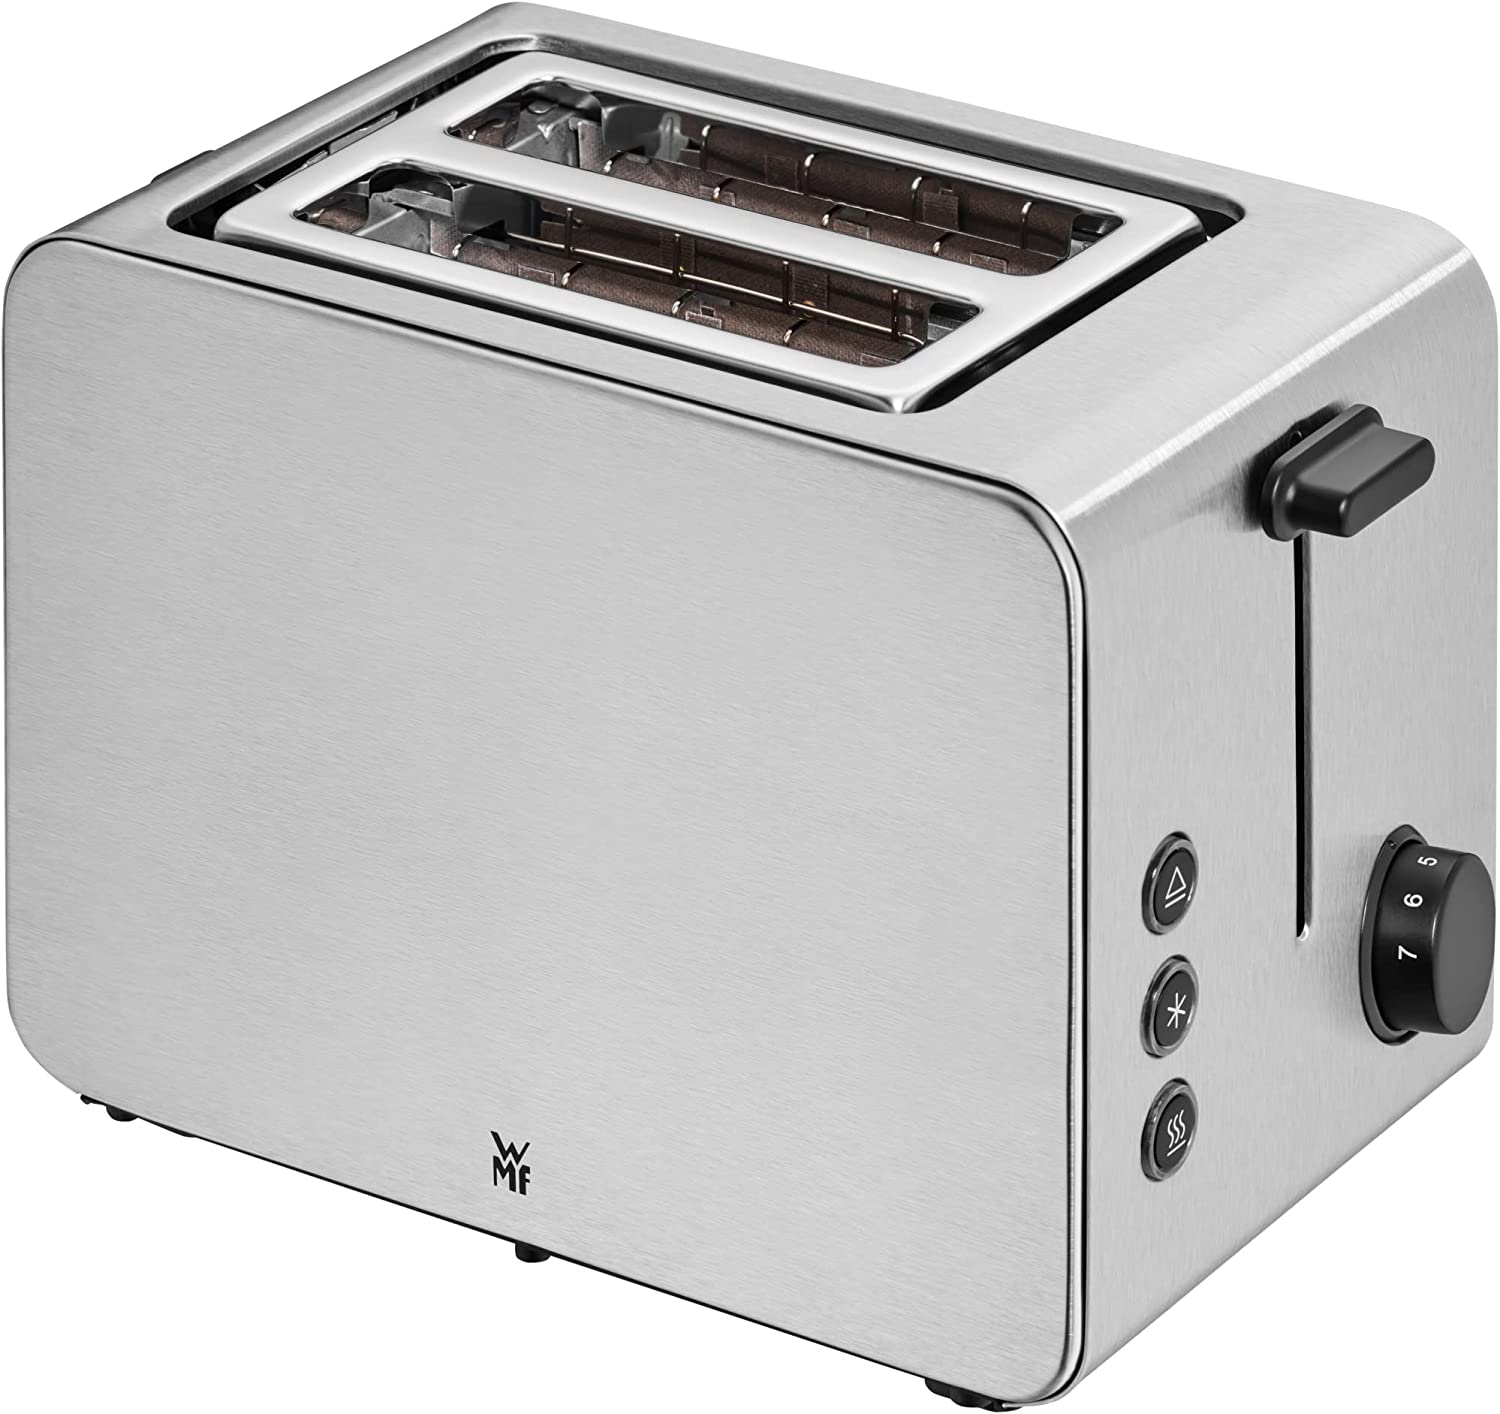 WMF Stelio Stainless Steel Toaster, Double Slot Toaster with Bun Attachment, 2 Slices, Bagel Function, 7 Browning Levels, 9 W, Matte Stainless Steel